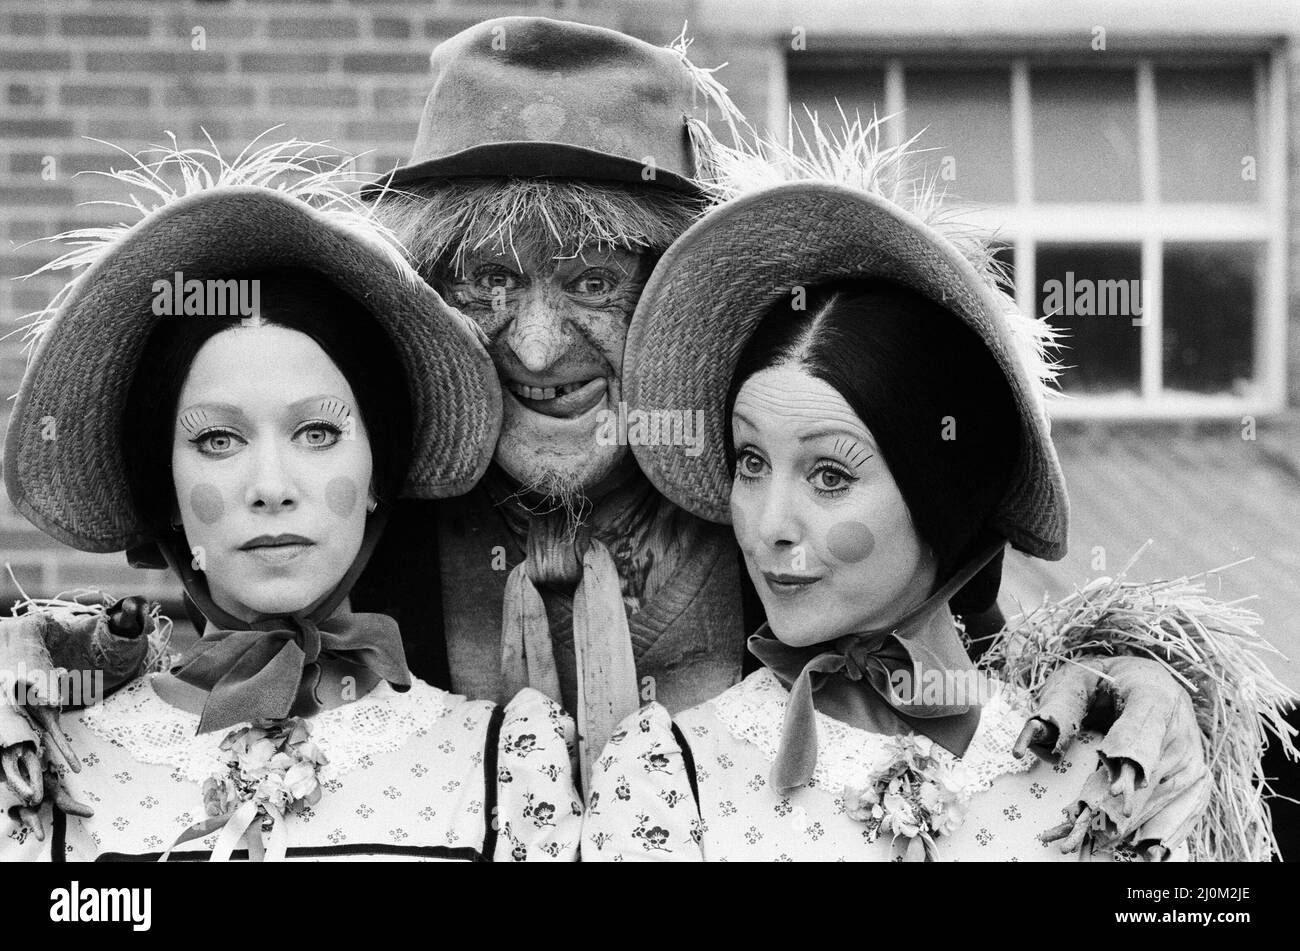 Children's television favourite, Worzel Gummidge, gets enough trouble from Aunt Sally but now coming on the scene is double trouble in the shape of Aunt Sally II. Worzel, played by Jon Pertwee, Aunt Sally by Una Stubbs (right) and Aunt Sally II by Connie Booth (left). 6th August 1981. Stock Photo